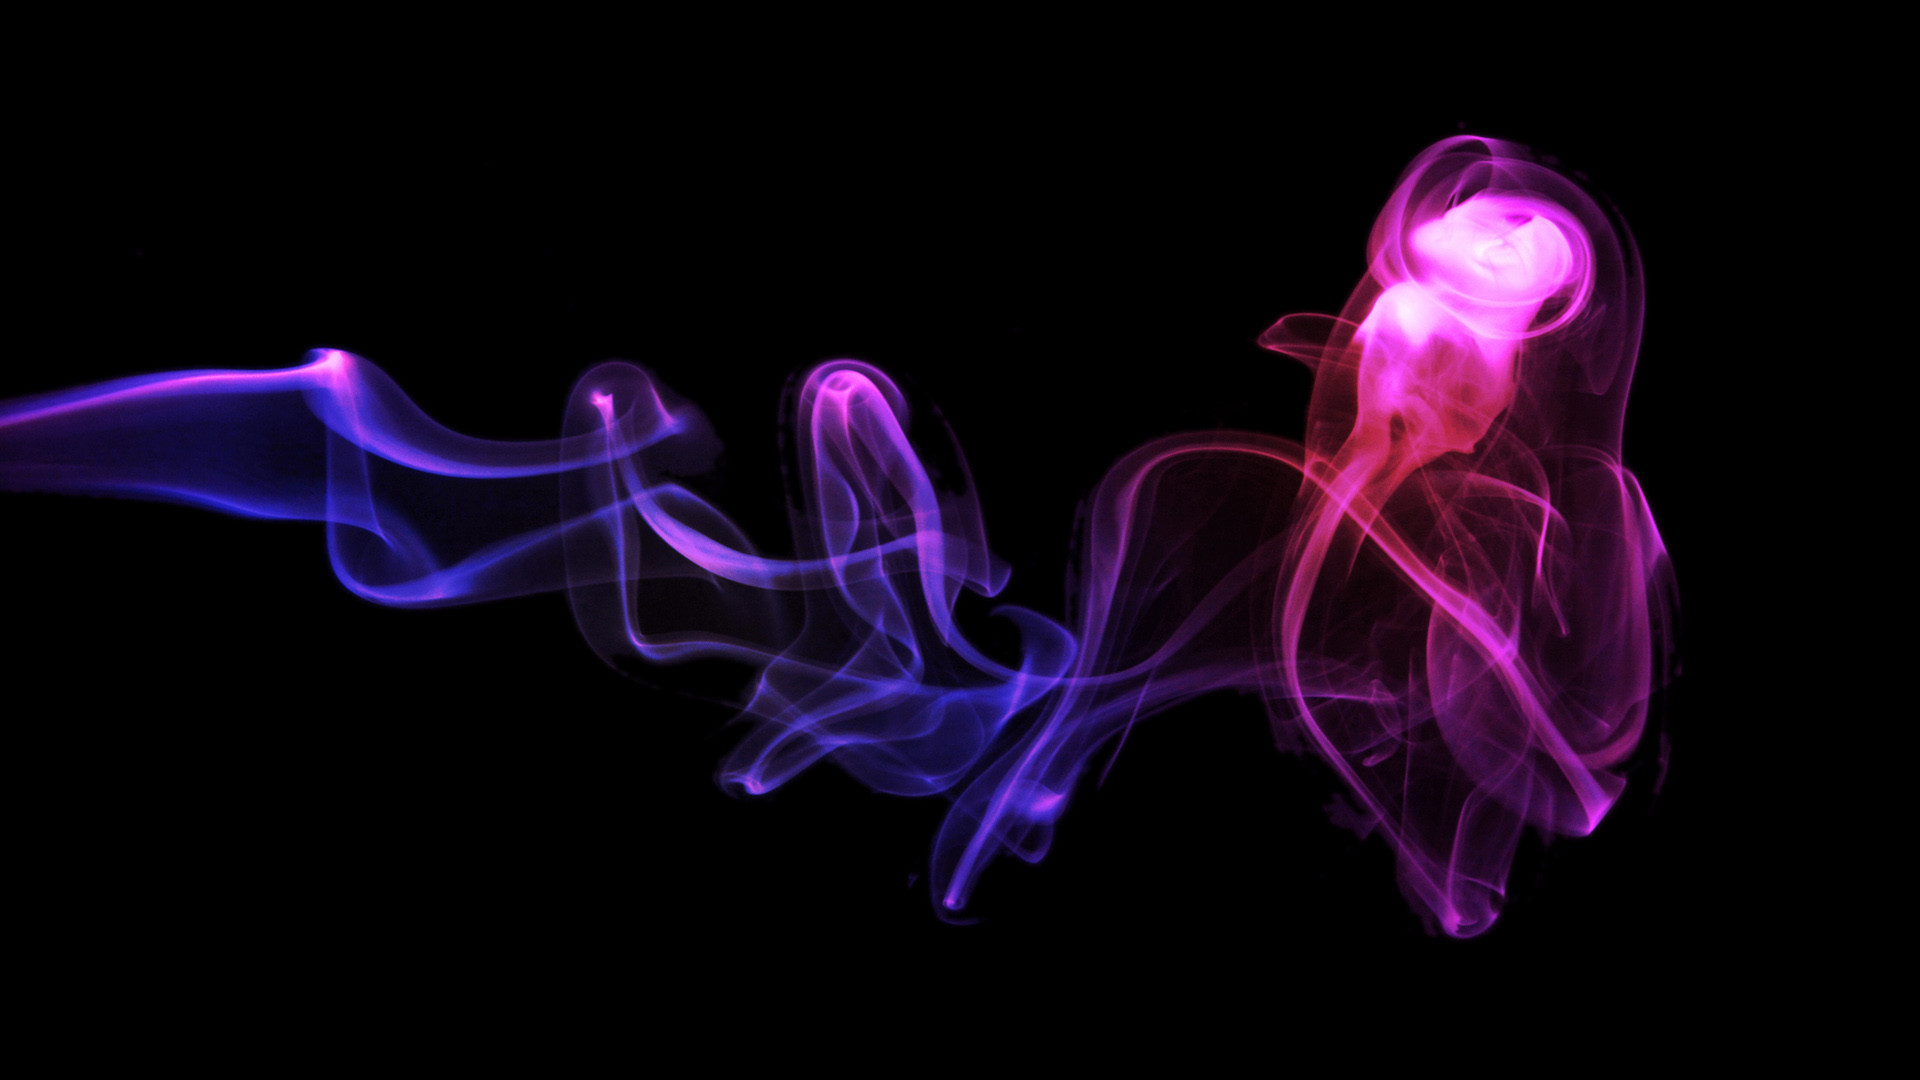 1920x1080  Abstract Smoke High Resolution Stock Photo -  http://www.dailystockphoto.net